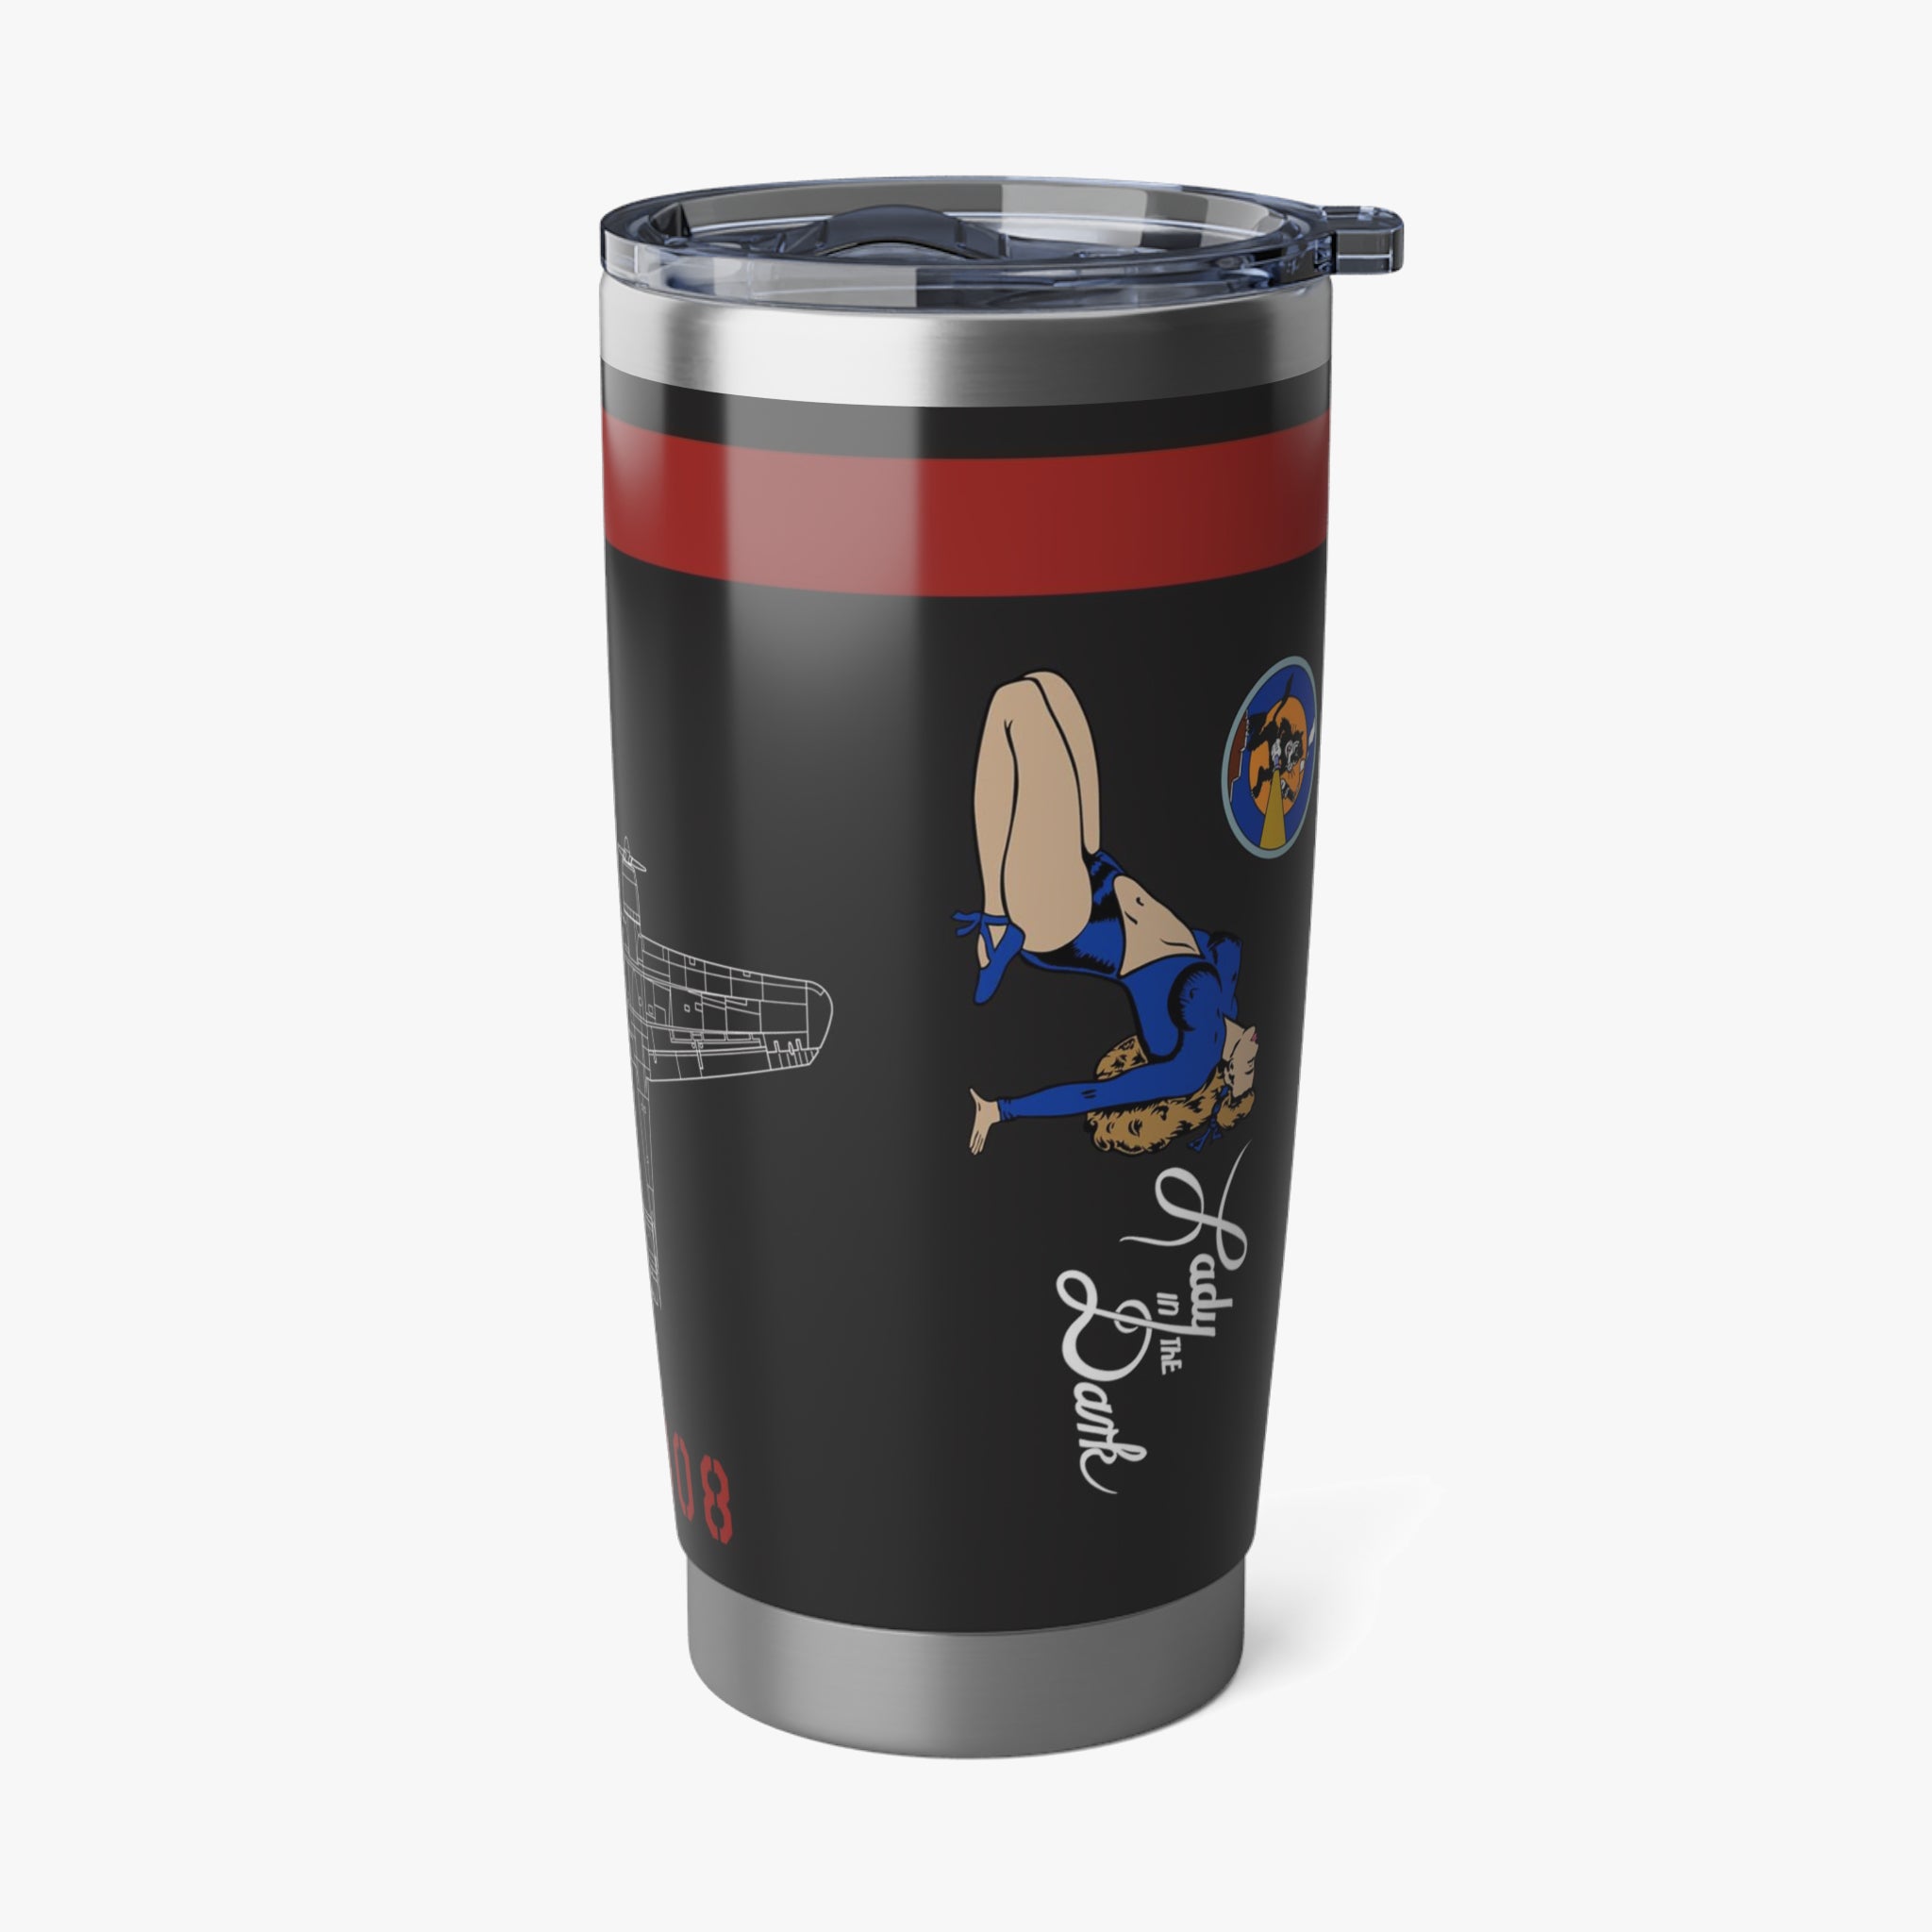 P-61 "Lady In The Dark" Inspired 20oz (590ml) Stainless Steel Tumbler - I Love a Hangar